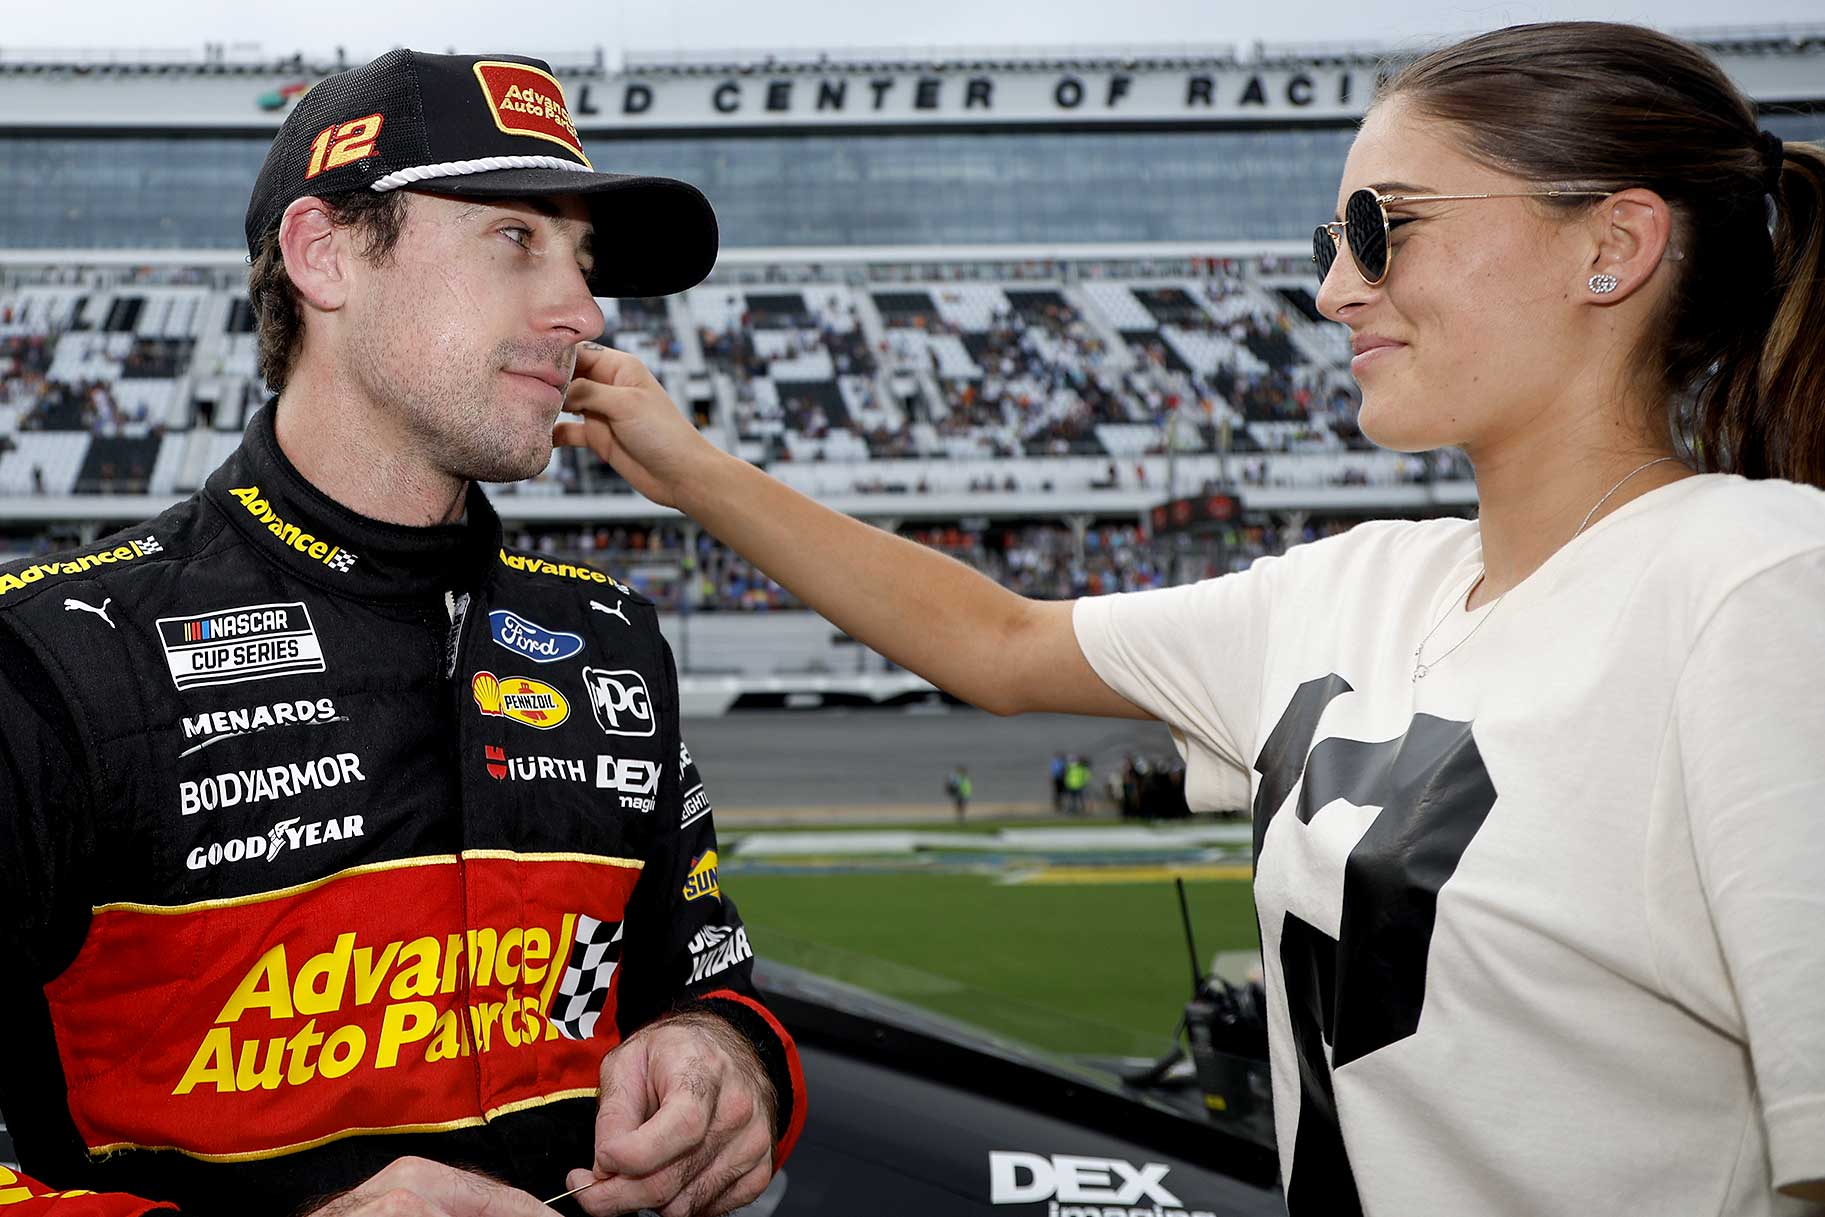 Gianna Tulio touches Ryan Blaney's face next to the track after a race